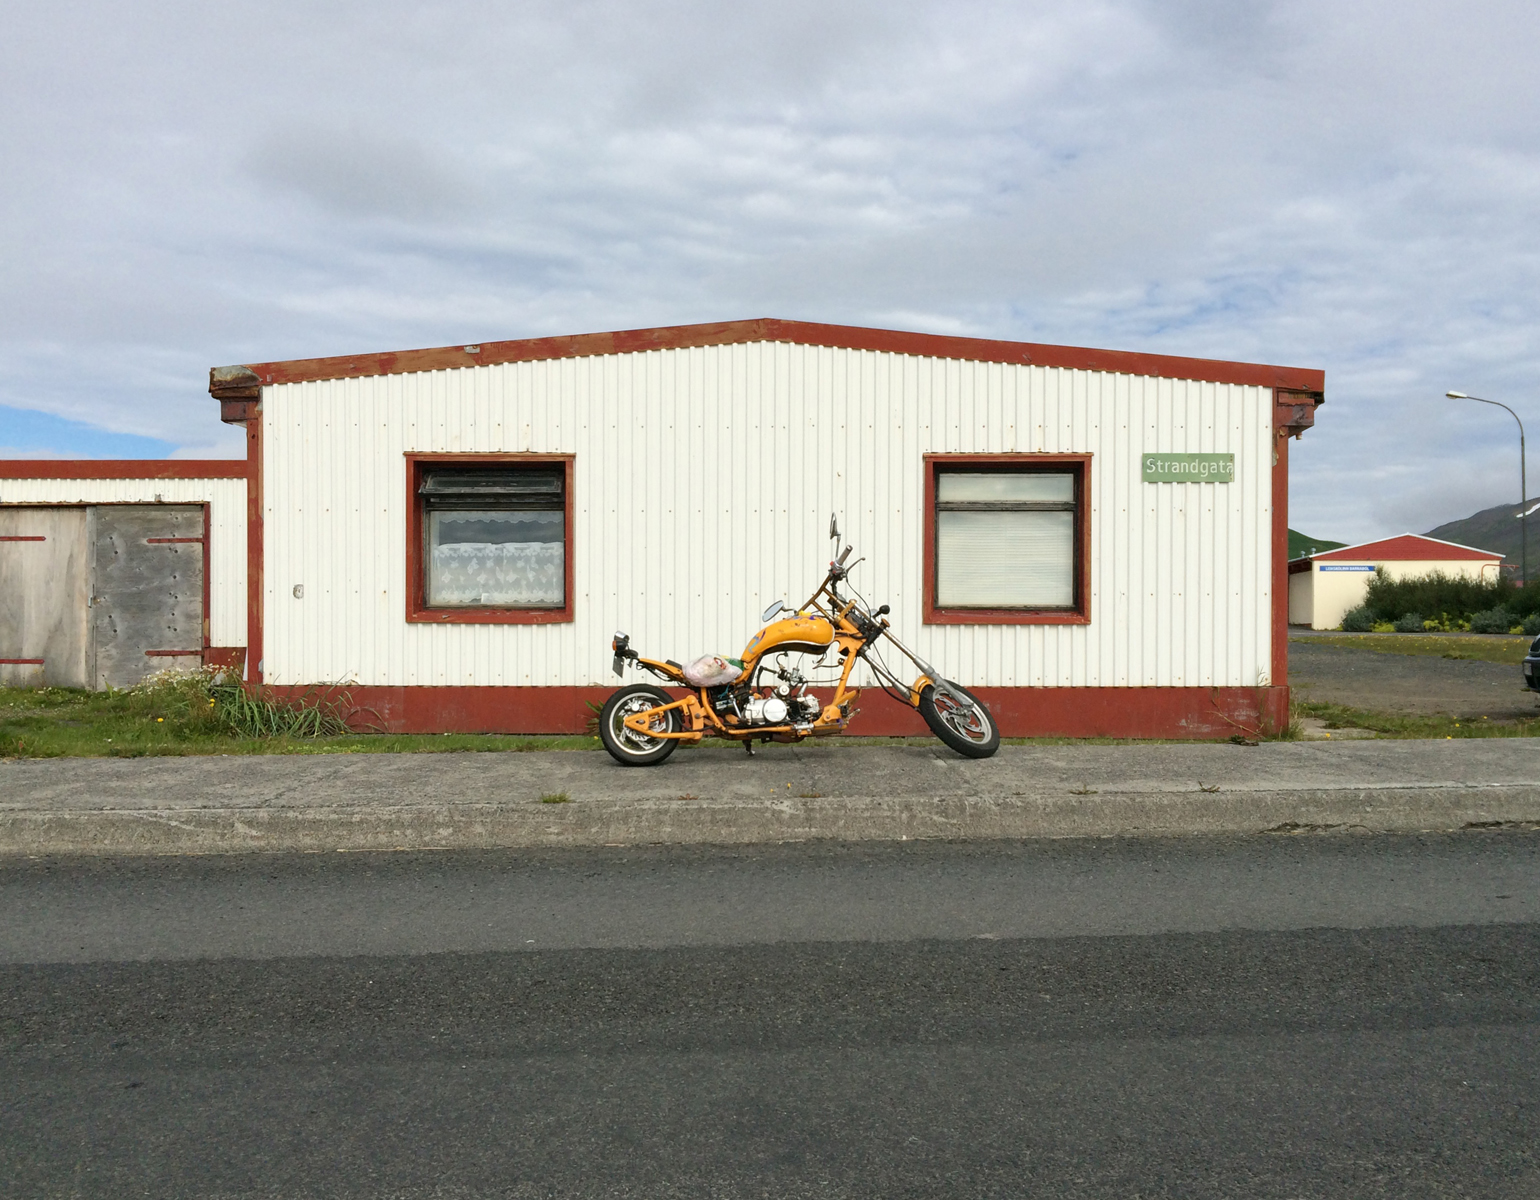 A white metal house with red trim, a yellow chopper motorcycle parked in front.